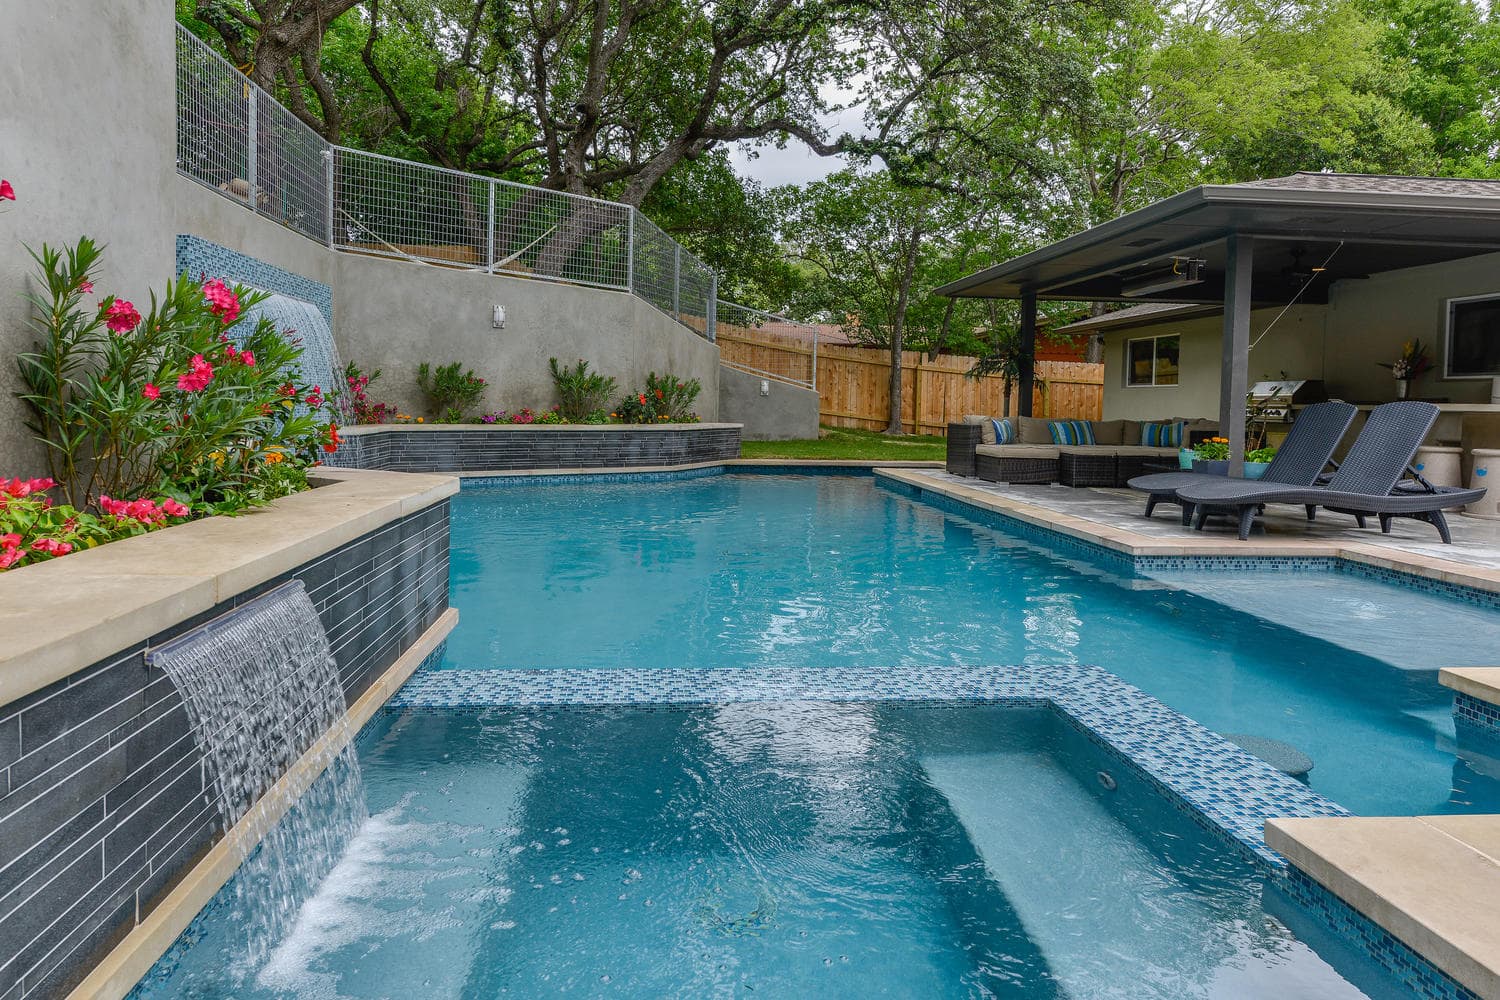 Top Five Things to Consider when Selecting New Pool Tile